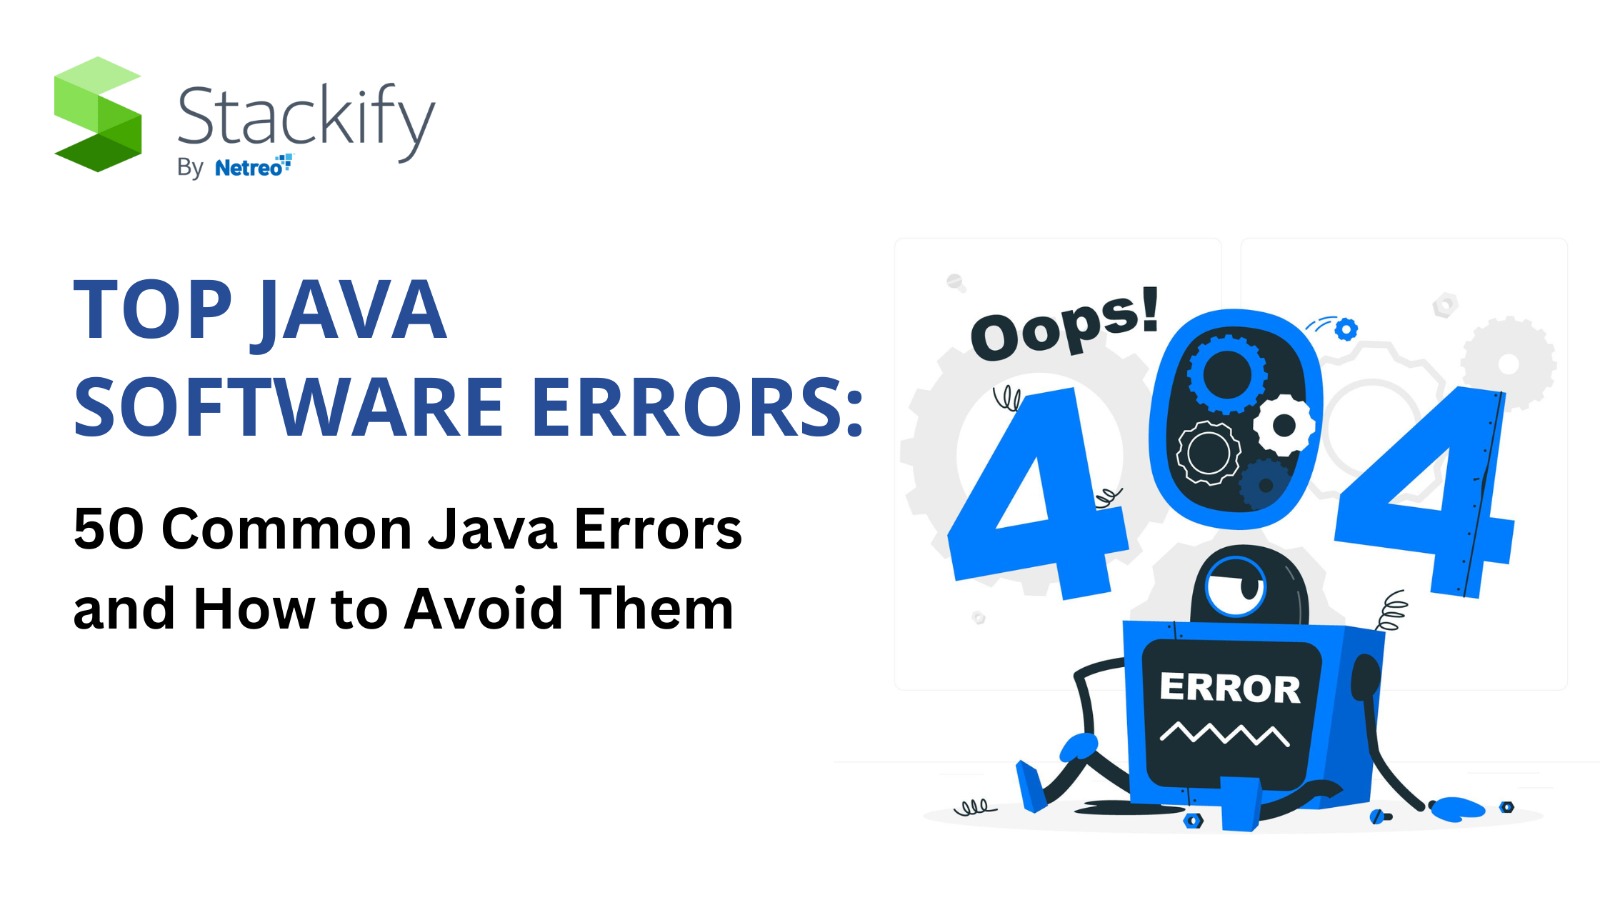 Top Java Software Errors: 50 Common Java Errors and How to Avoid Them